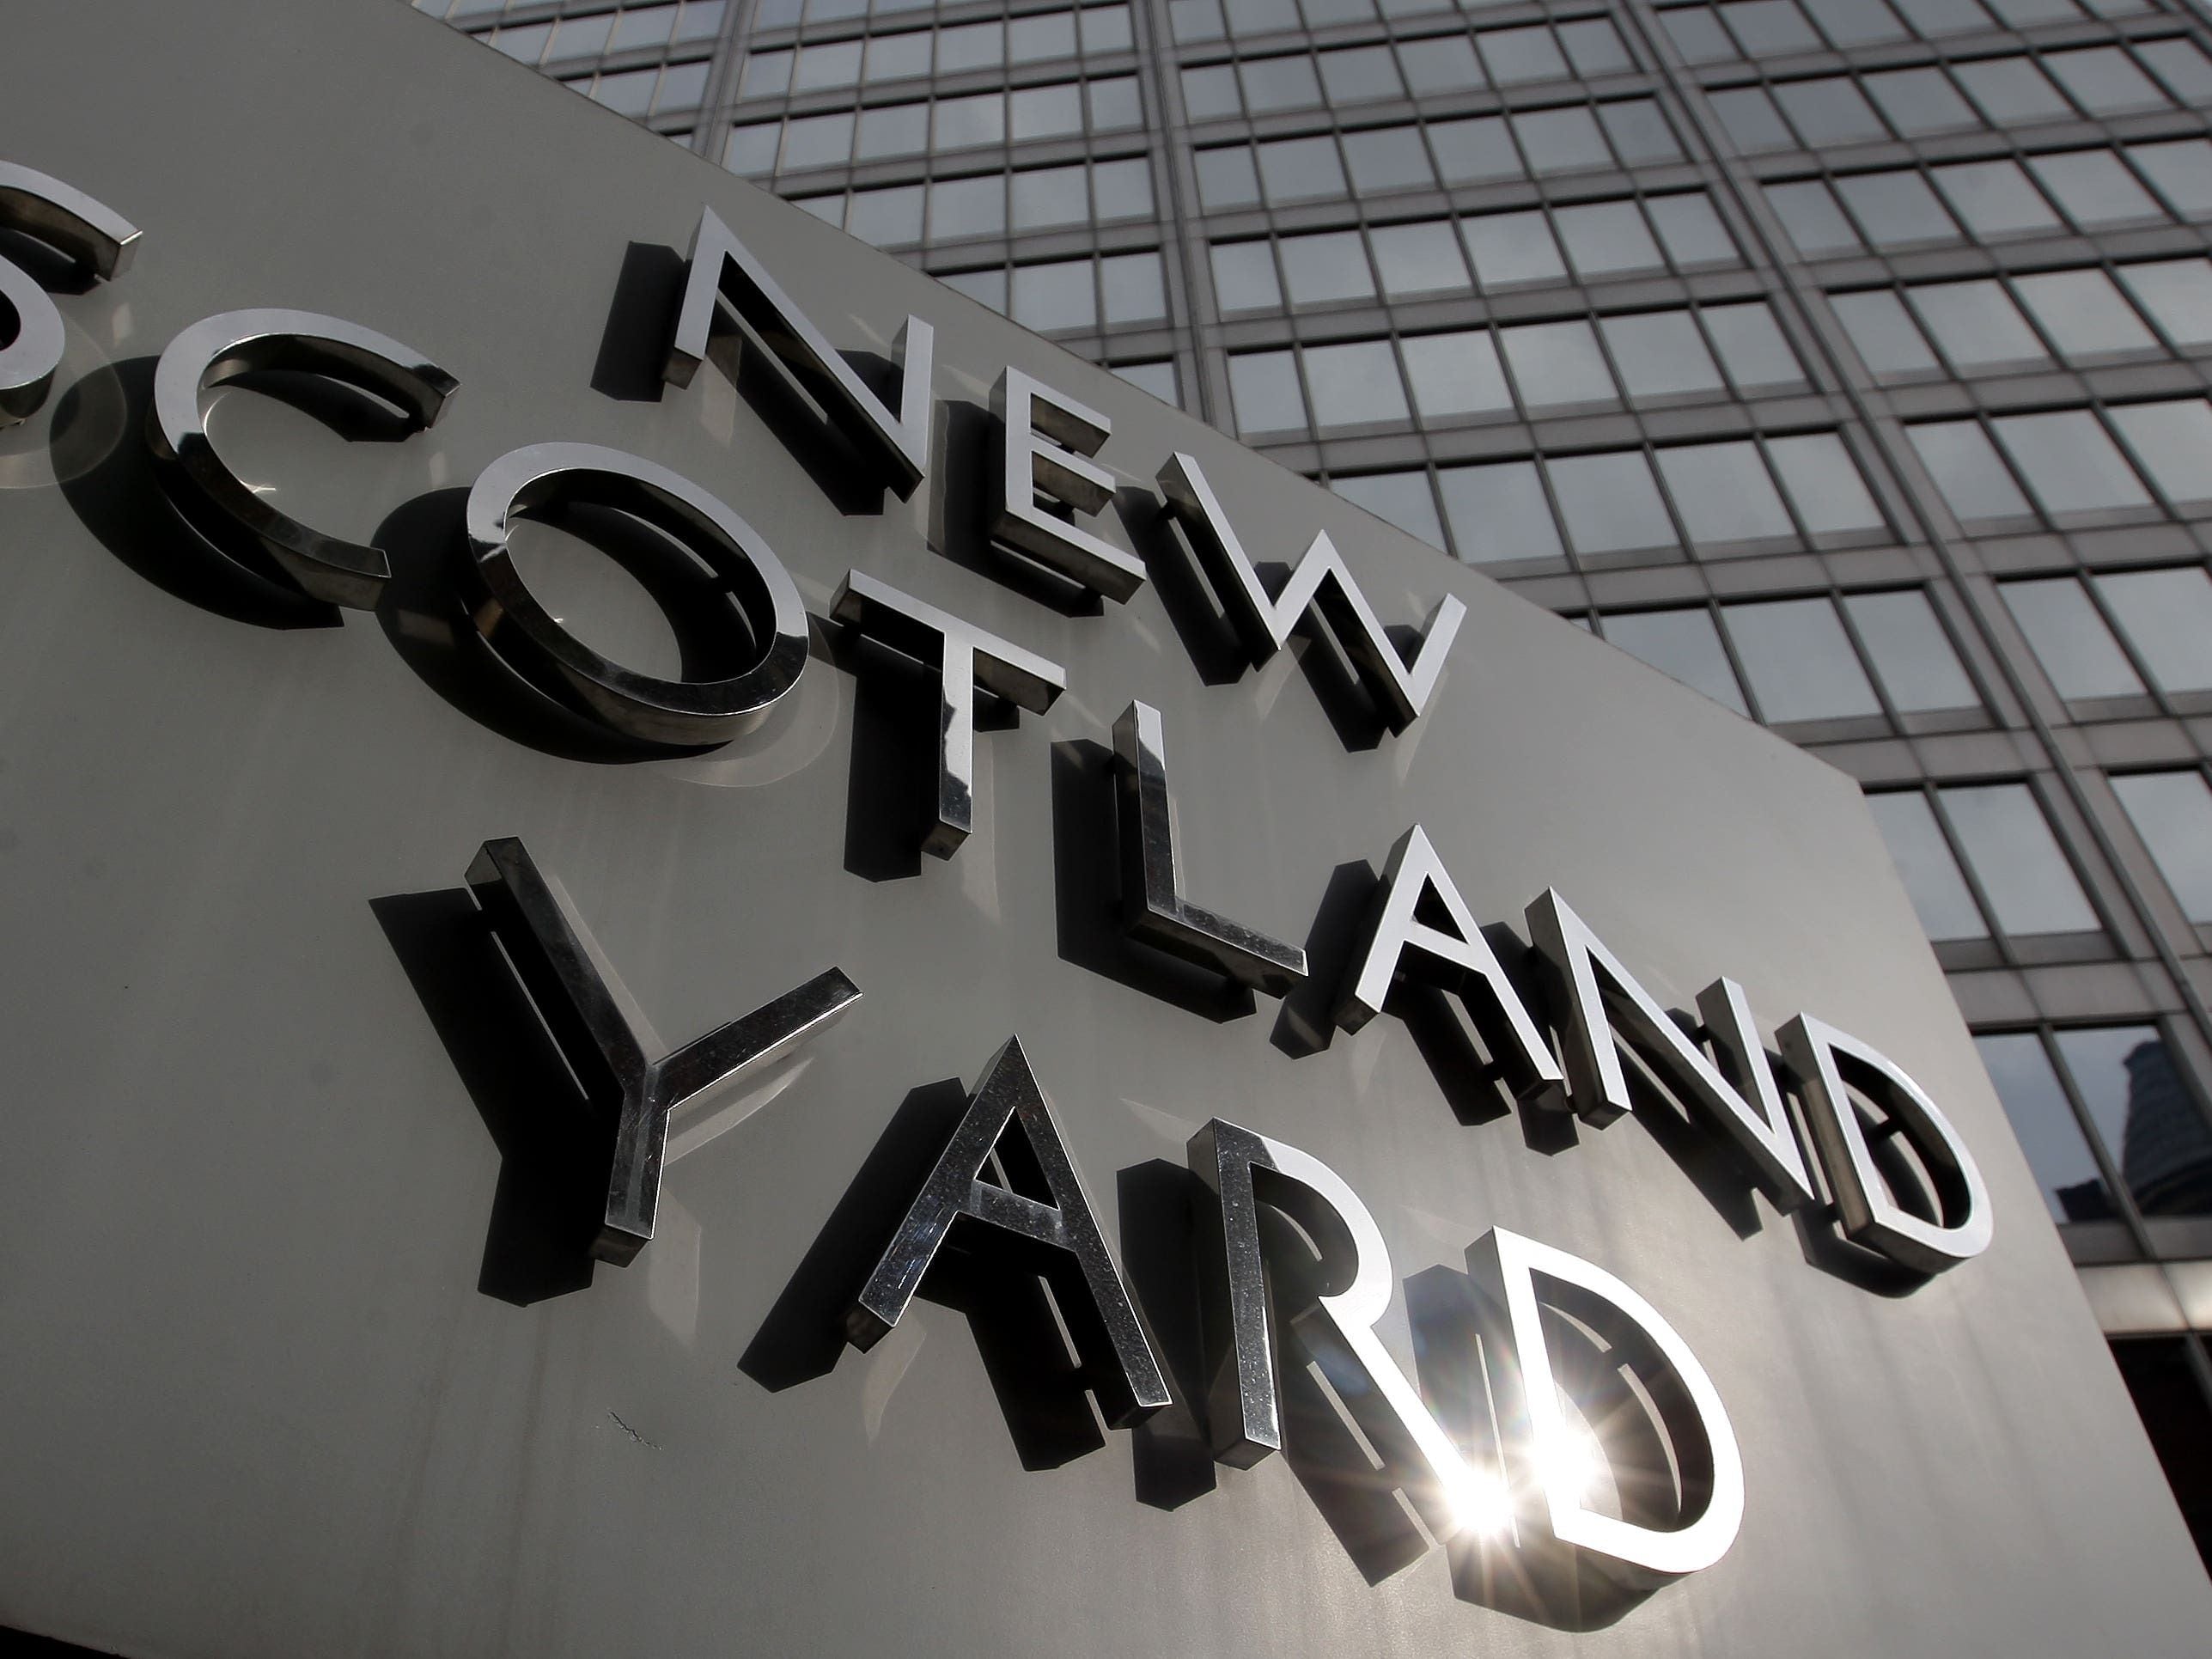 Serving Metropolitan Police officer charged with sexual assault